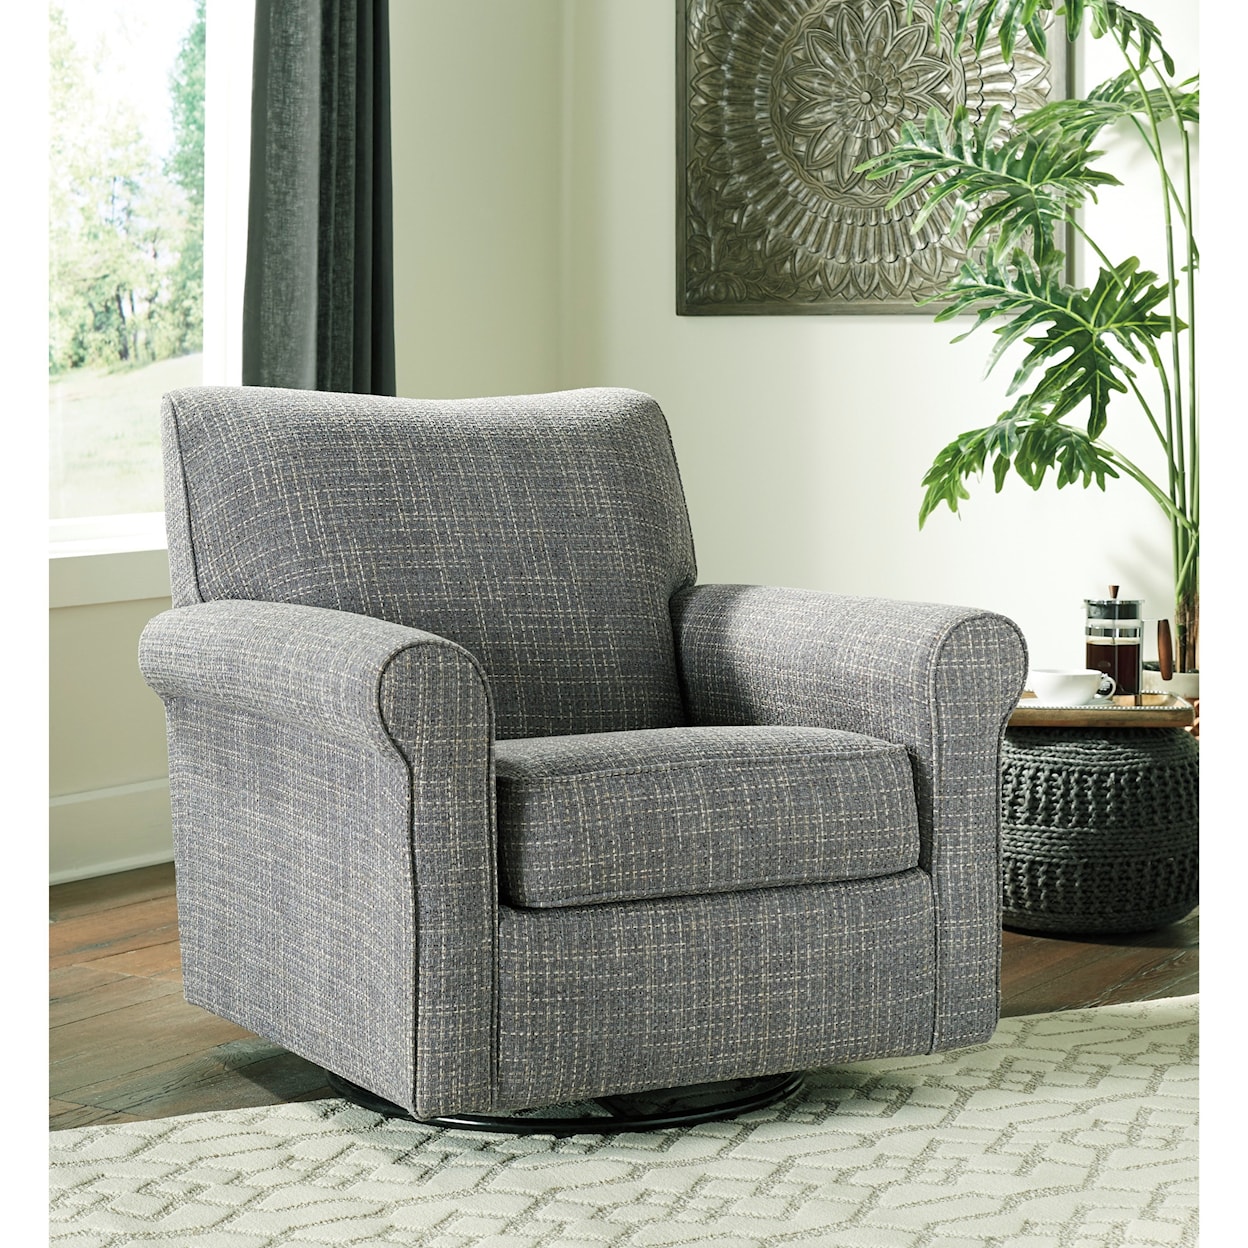 Signature Design by Ashley Renley Swivel Glider Accent Chair